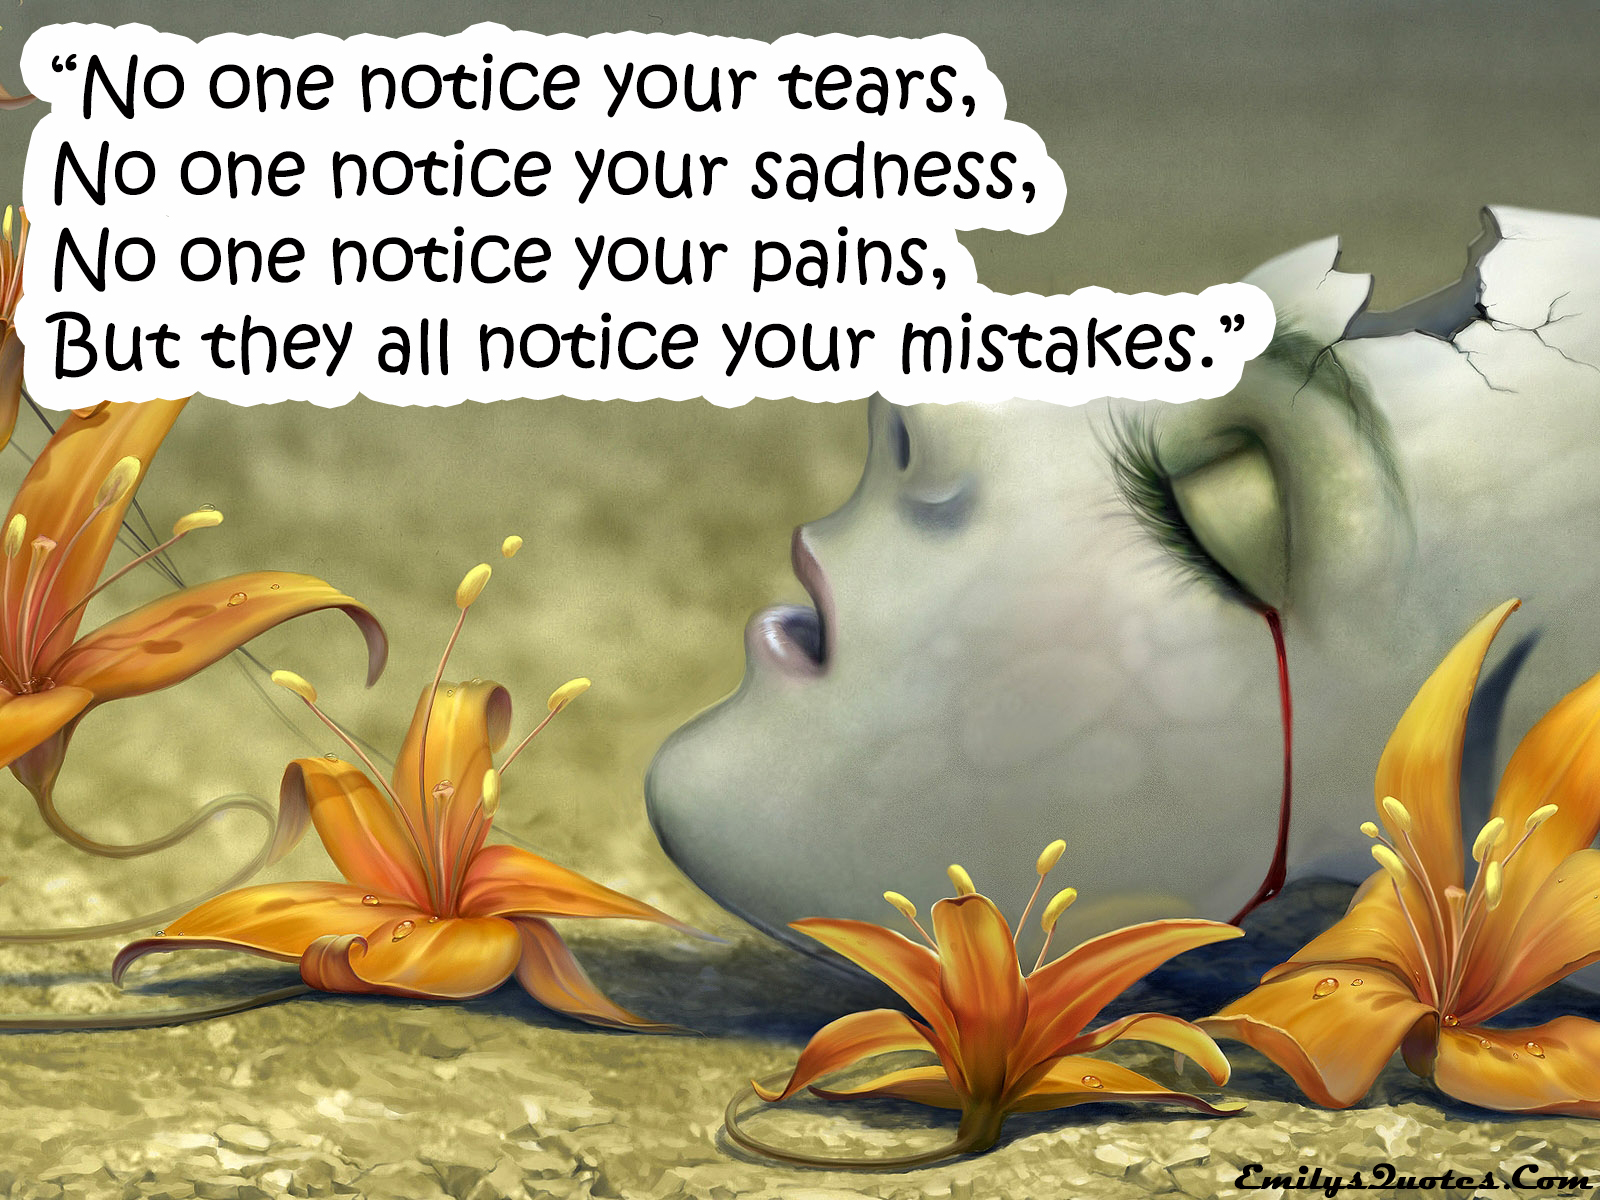 No one notice your tears,  No one notice your sadness,  No one notice your pains,  But they all notice your mistakes.